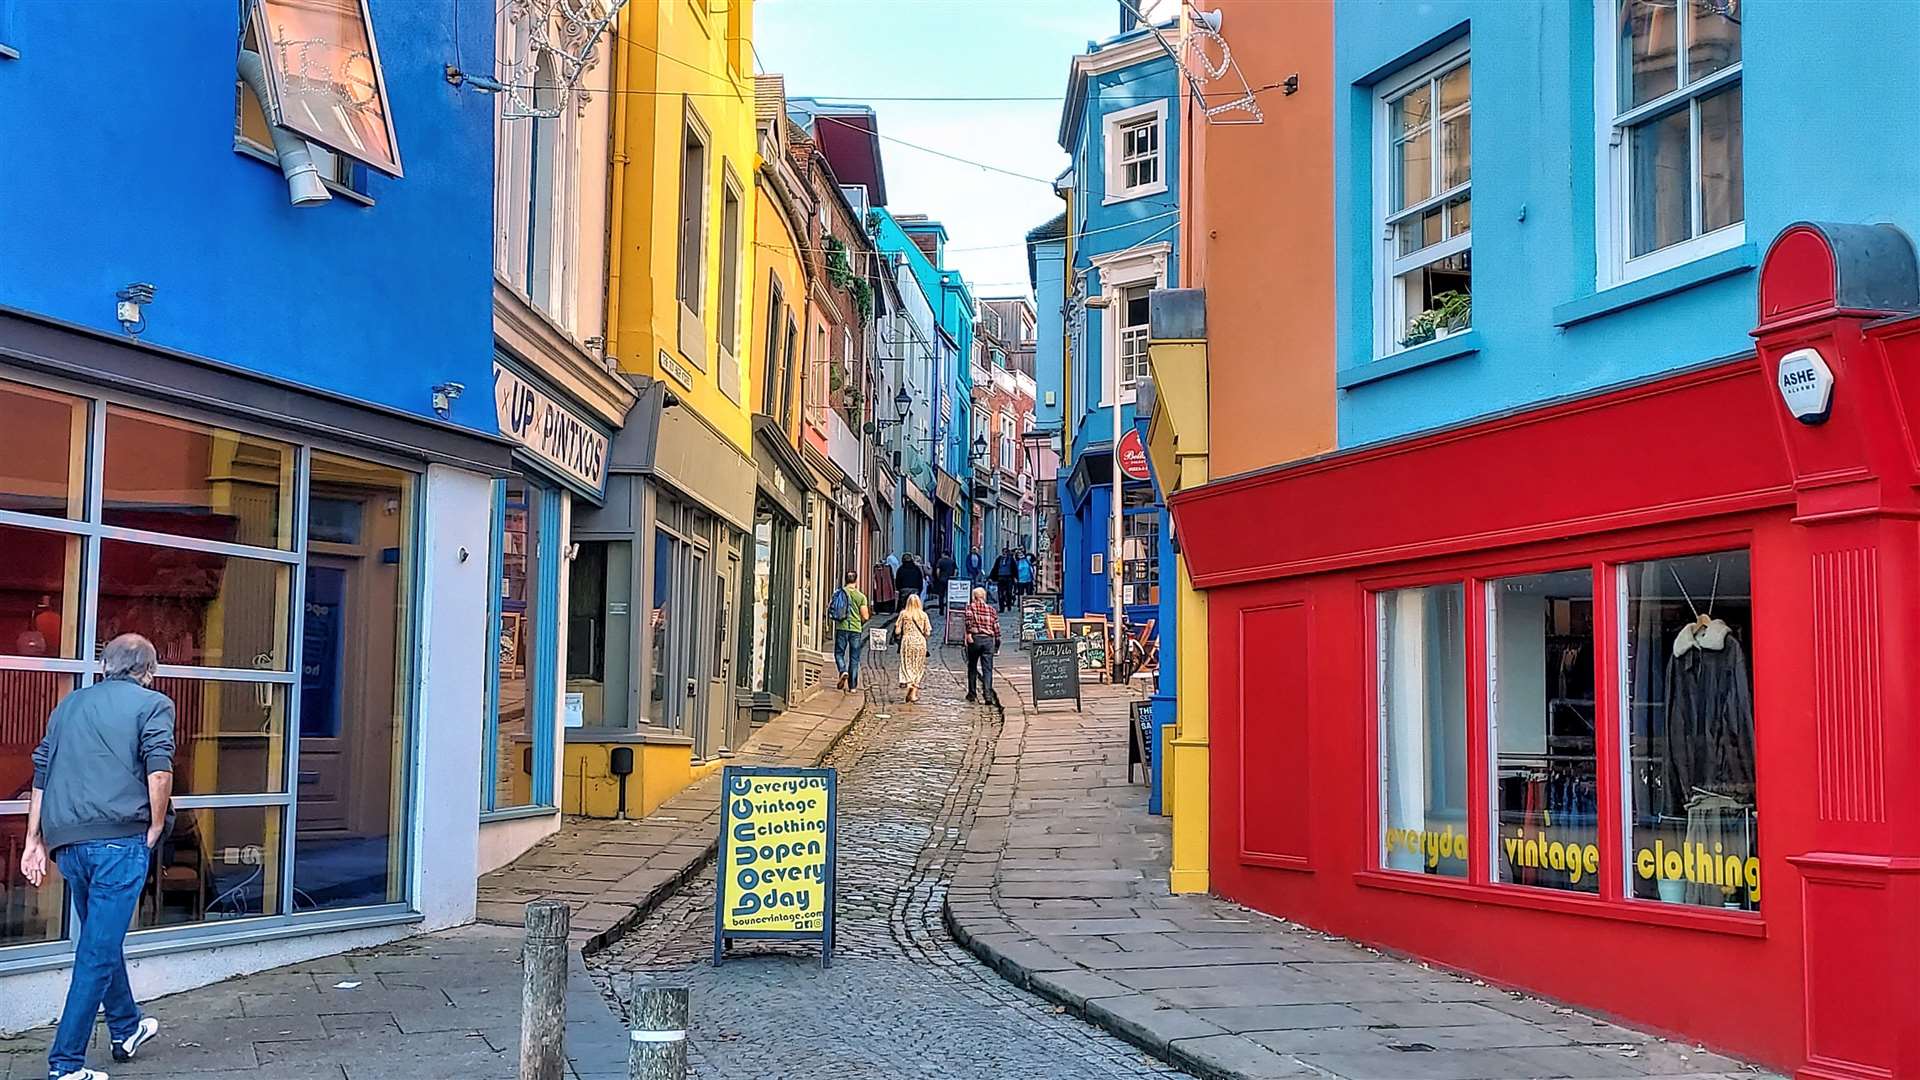 The Old High Street has been described as one of the “coolest and most colourful shopping streets in the land”